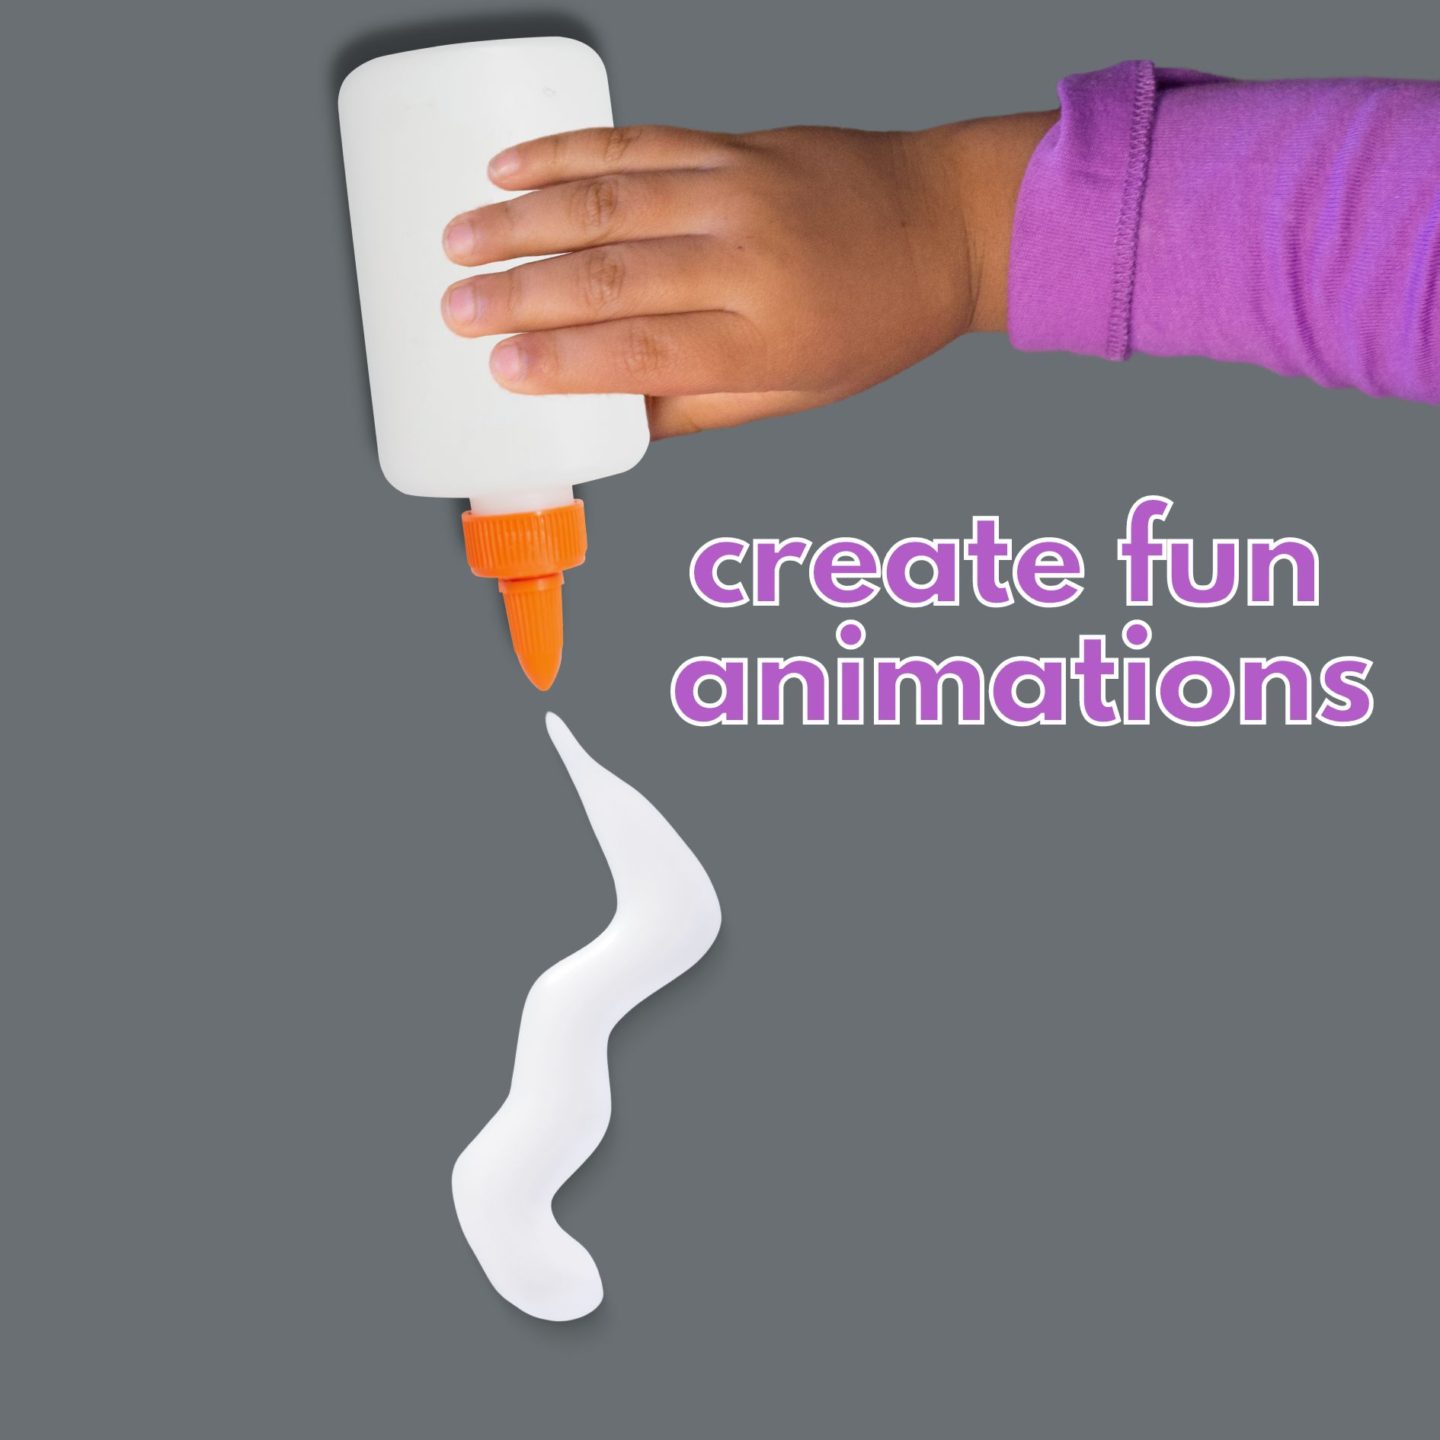 This hand mockup is used to show a young students squeezing a glue bottle.